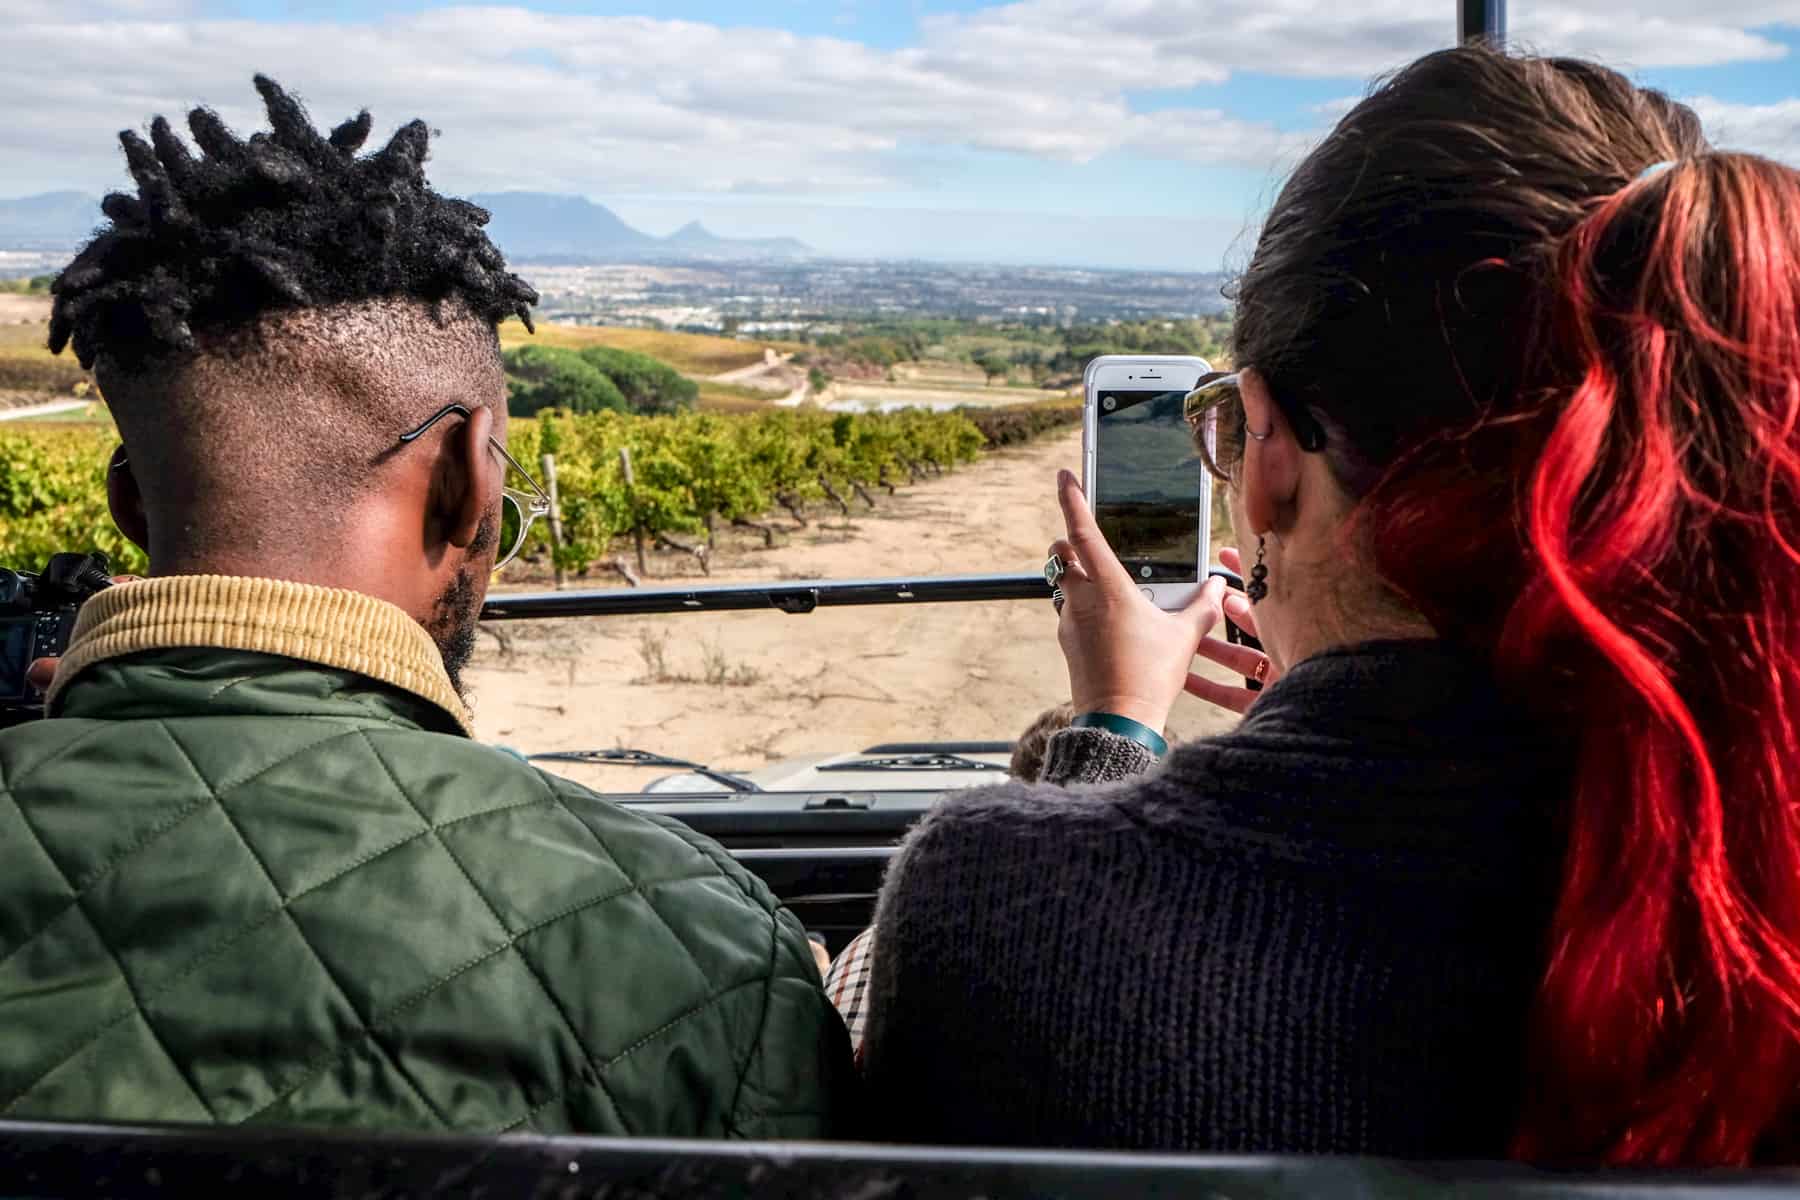 A woman with red hair takes a picture of the landscape before her on her mobile phone while on a jeep. She sits next to a man looking straight ahead at the view